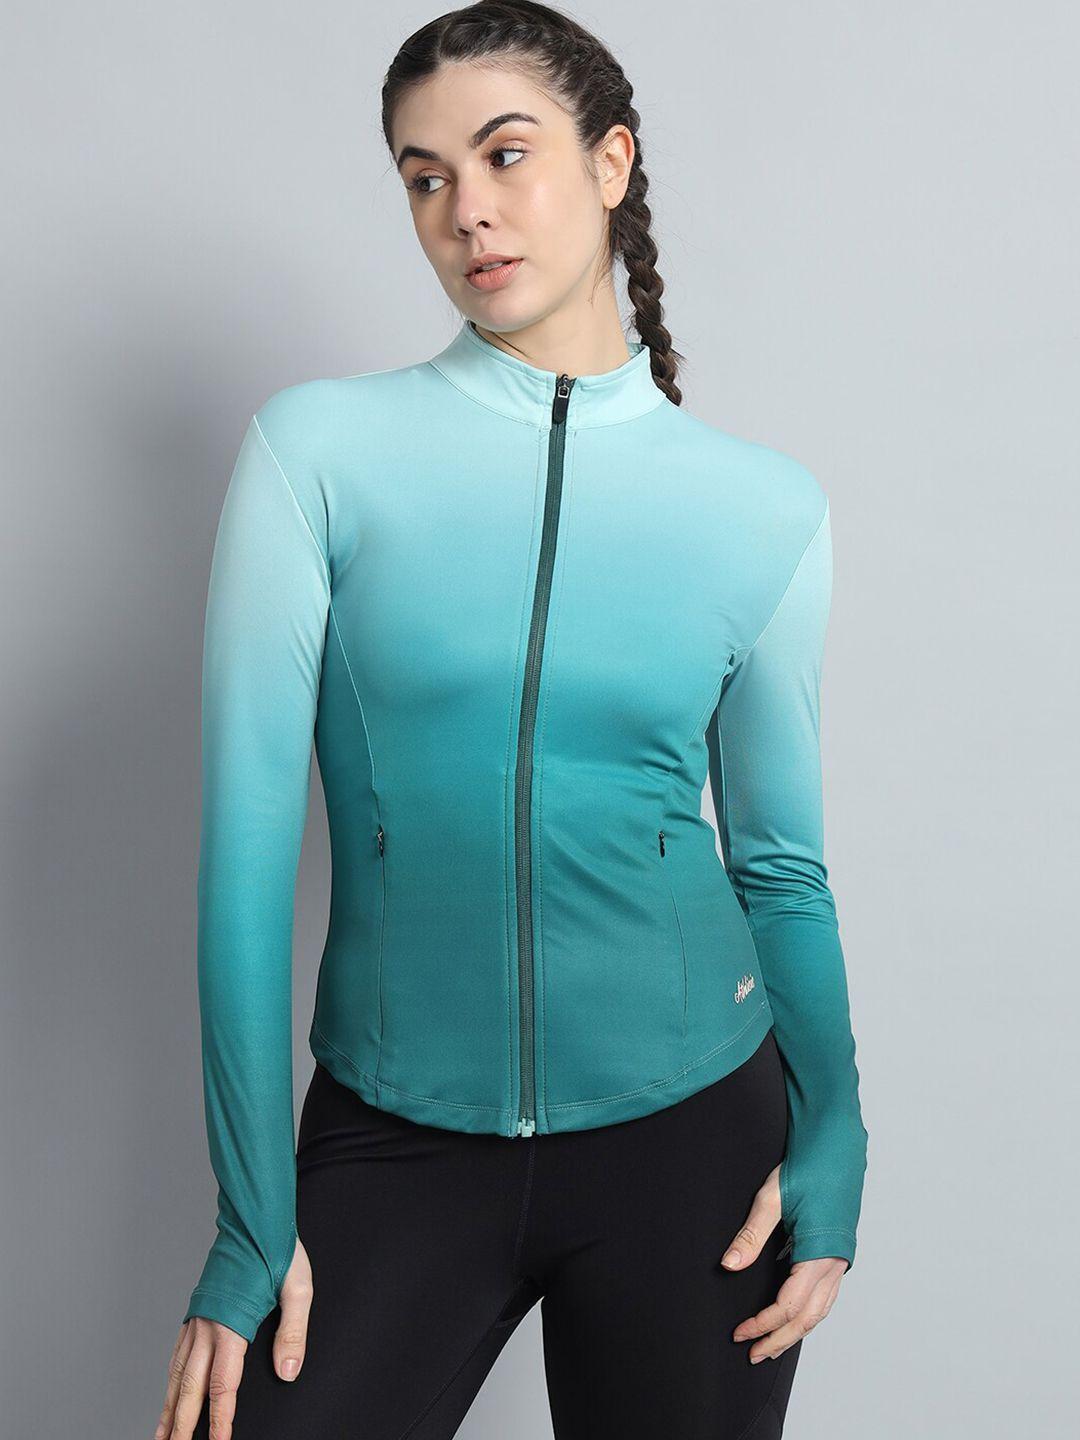 athlisis lightweight dry-fit training or gym sporty jacket